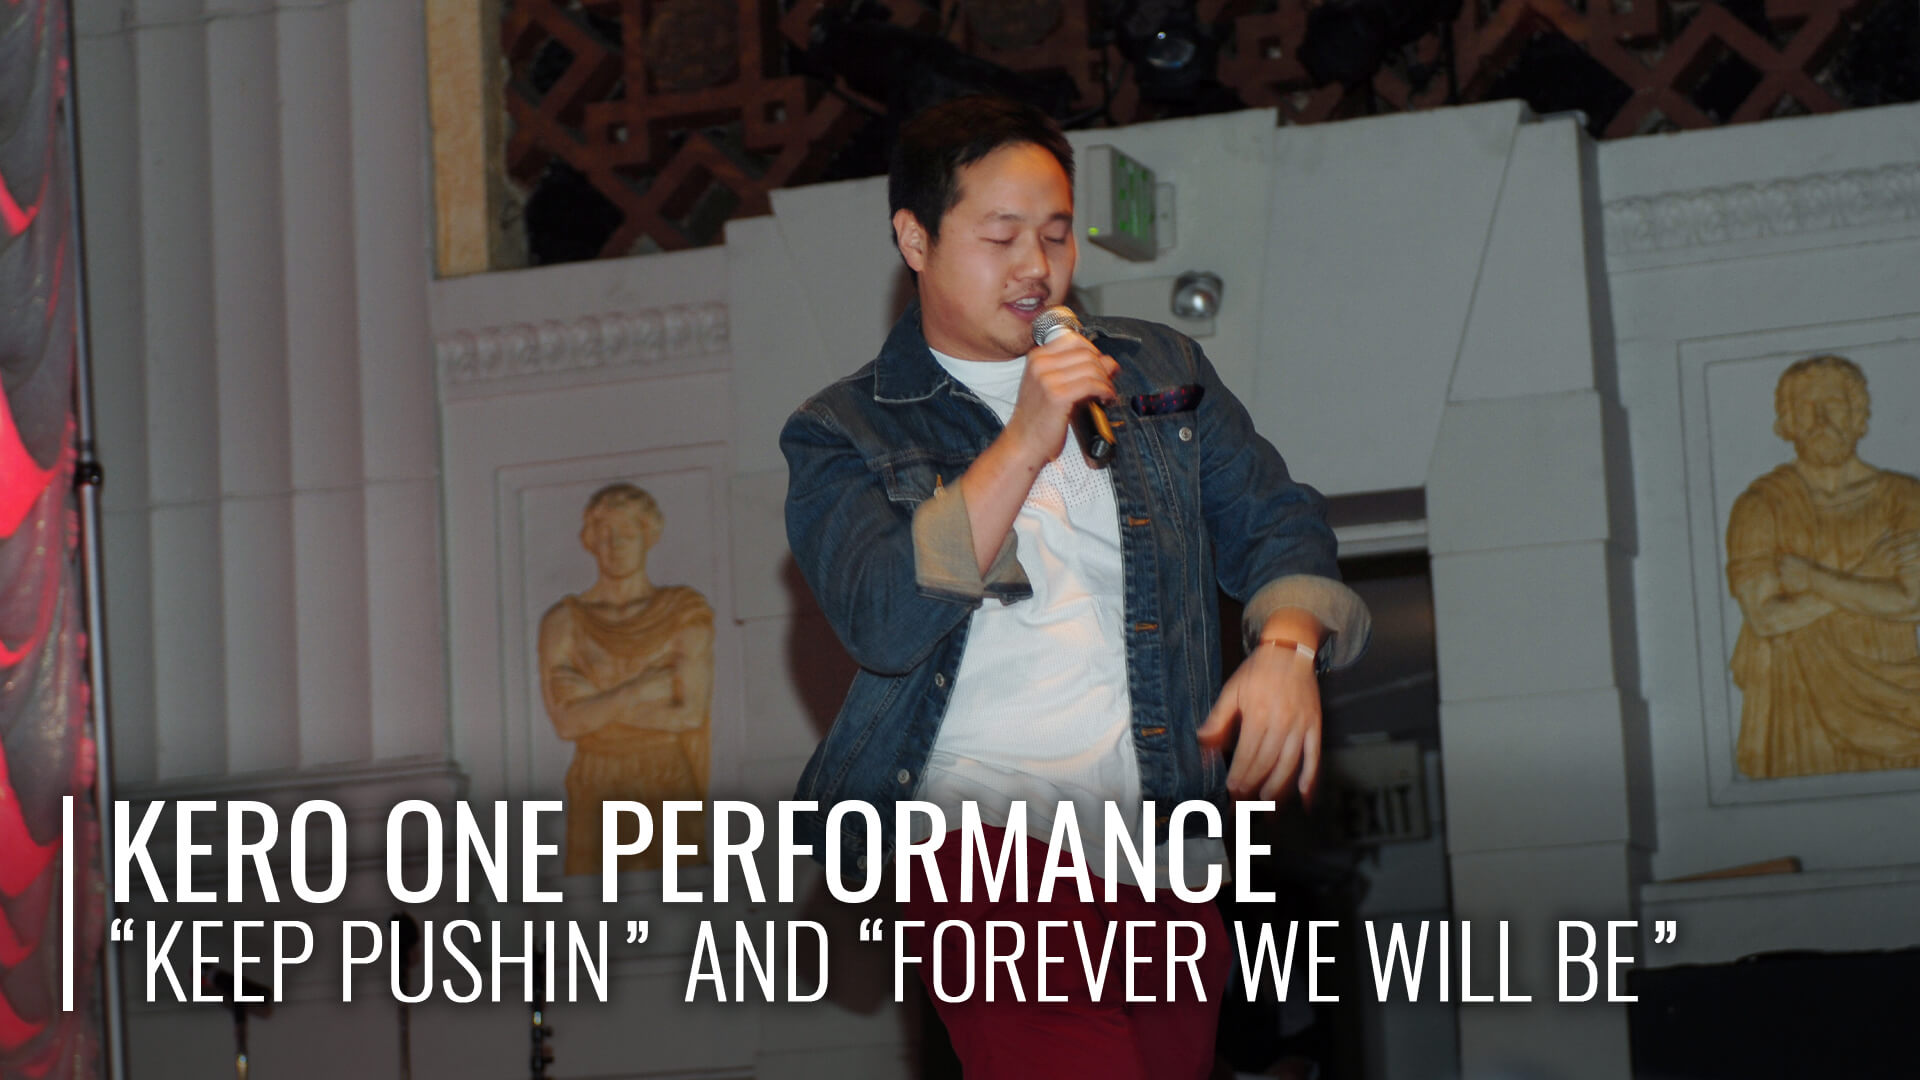 Kero One Performs “Keep Pushin” and “Forever We Will Be” Live at Unforgettable 2010